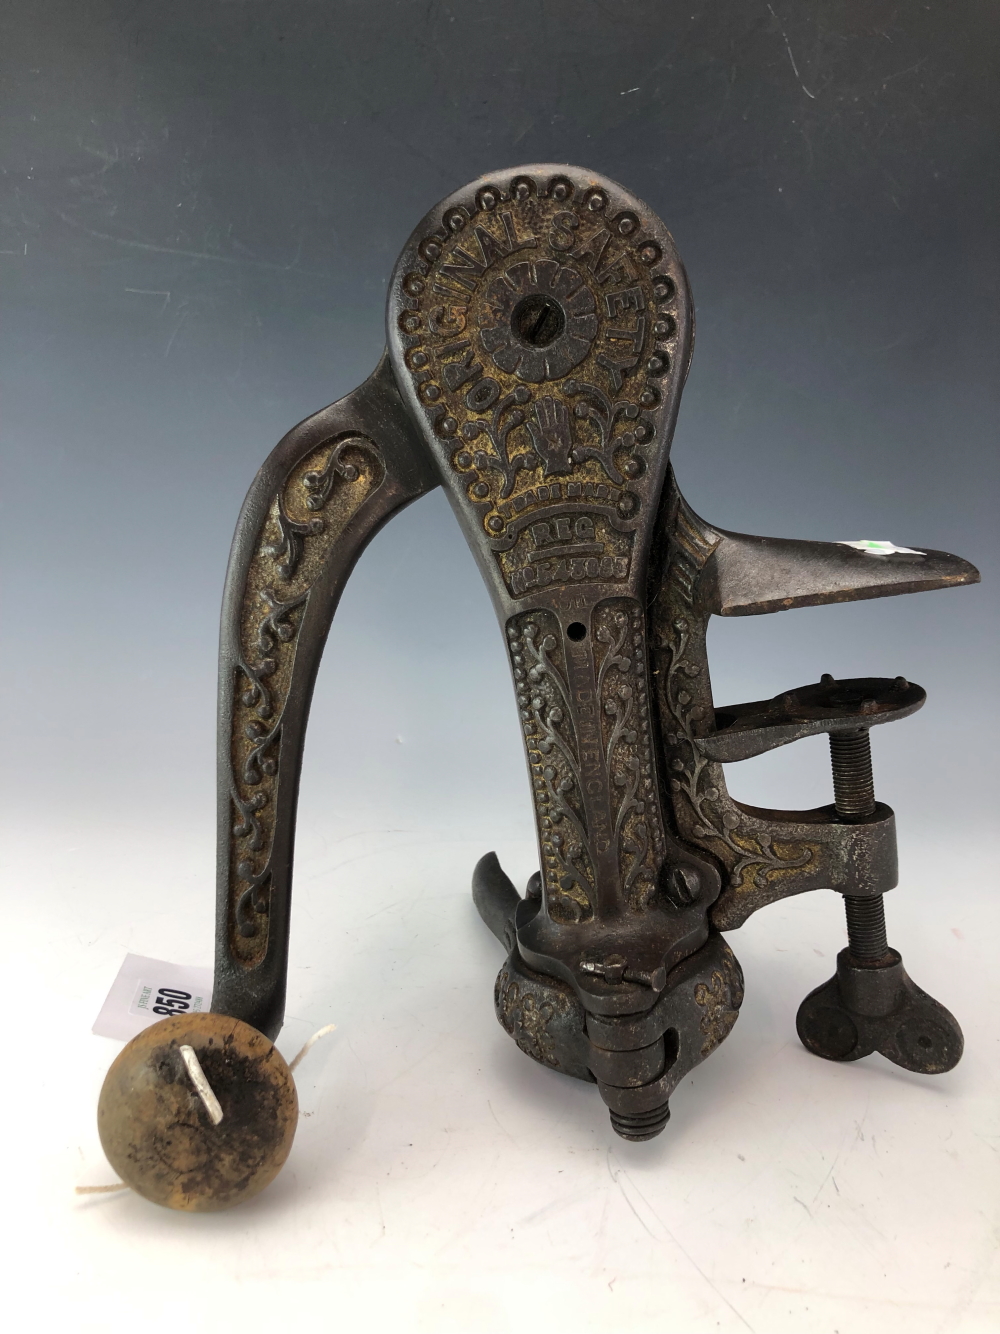 A VICTORIAN TABLE CLAMPING IRON CORKSCREW OPERATED BY A SUBSTANTIAL LEVER ARM - Image 3 of 5